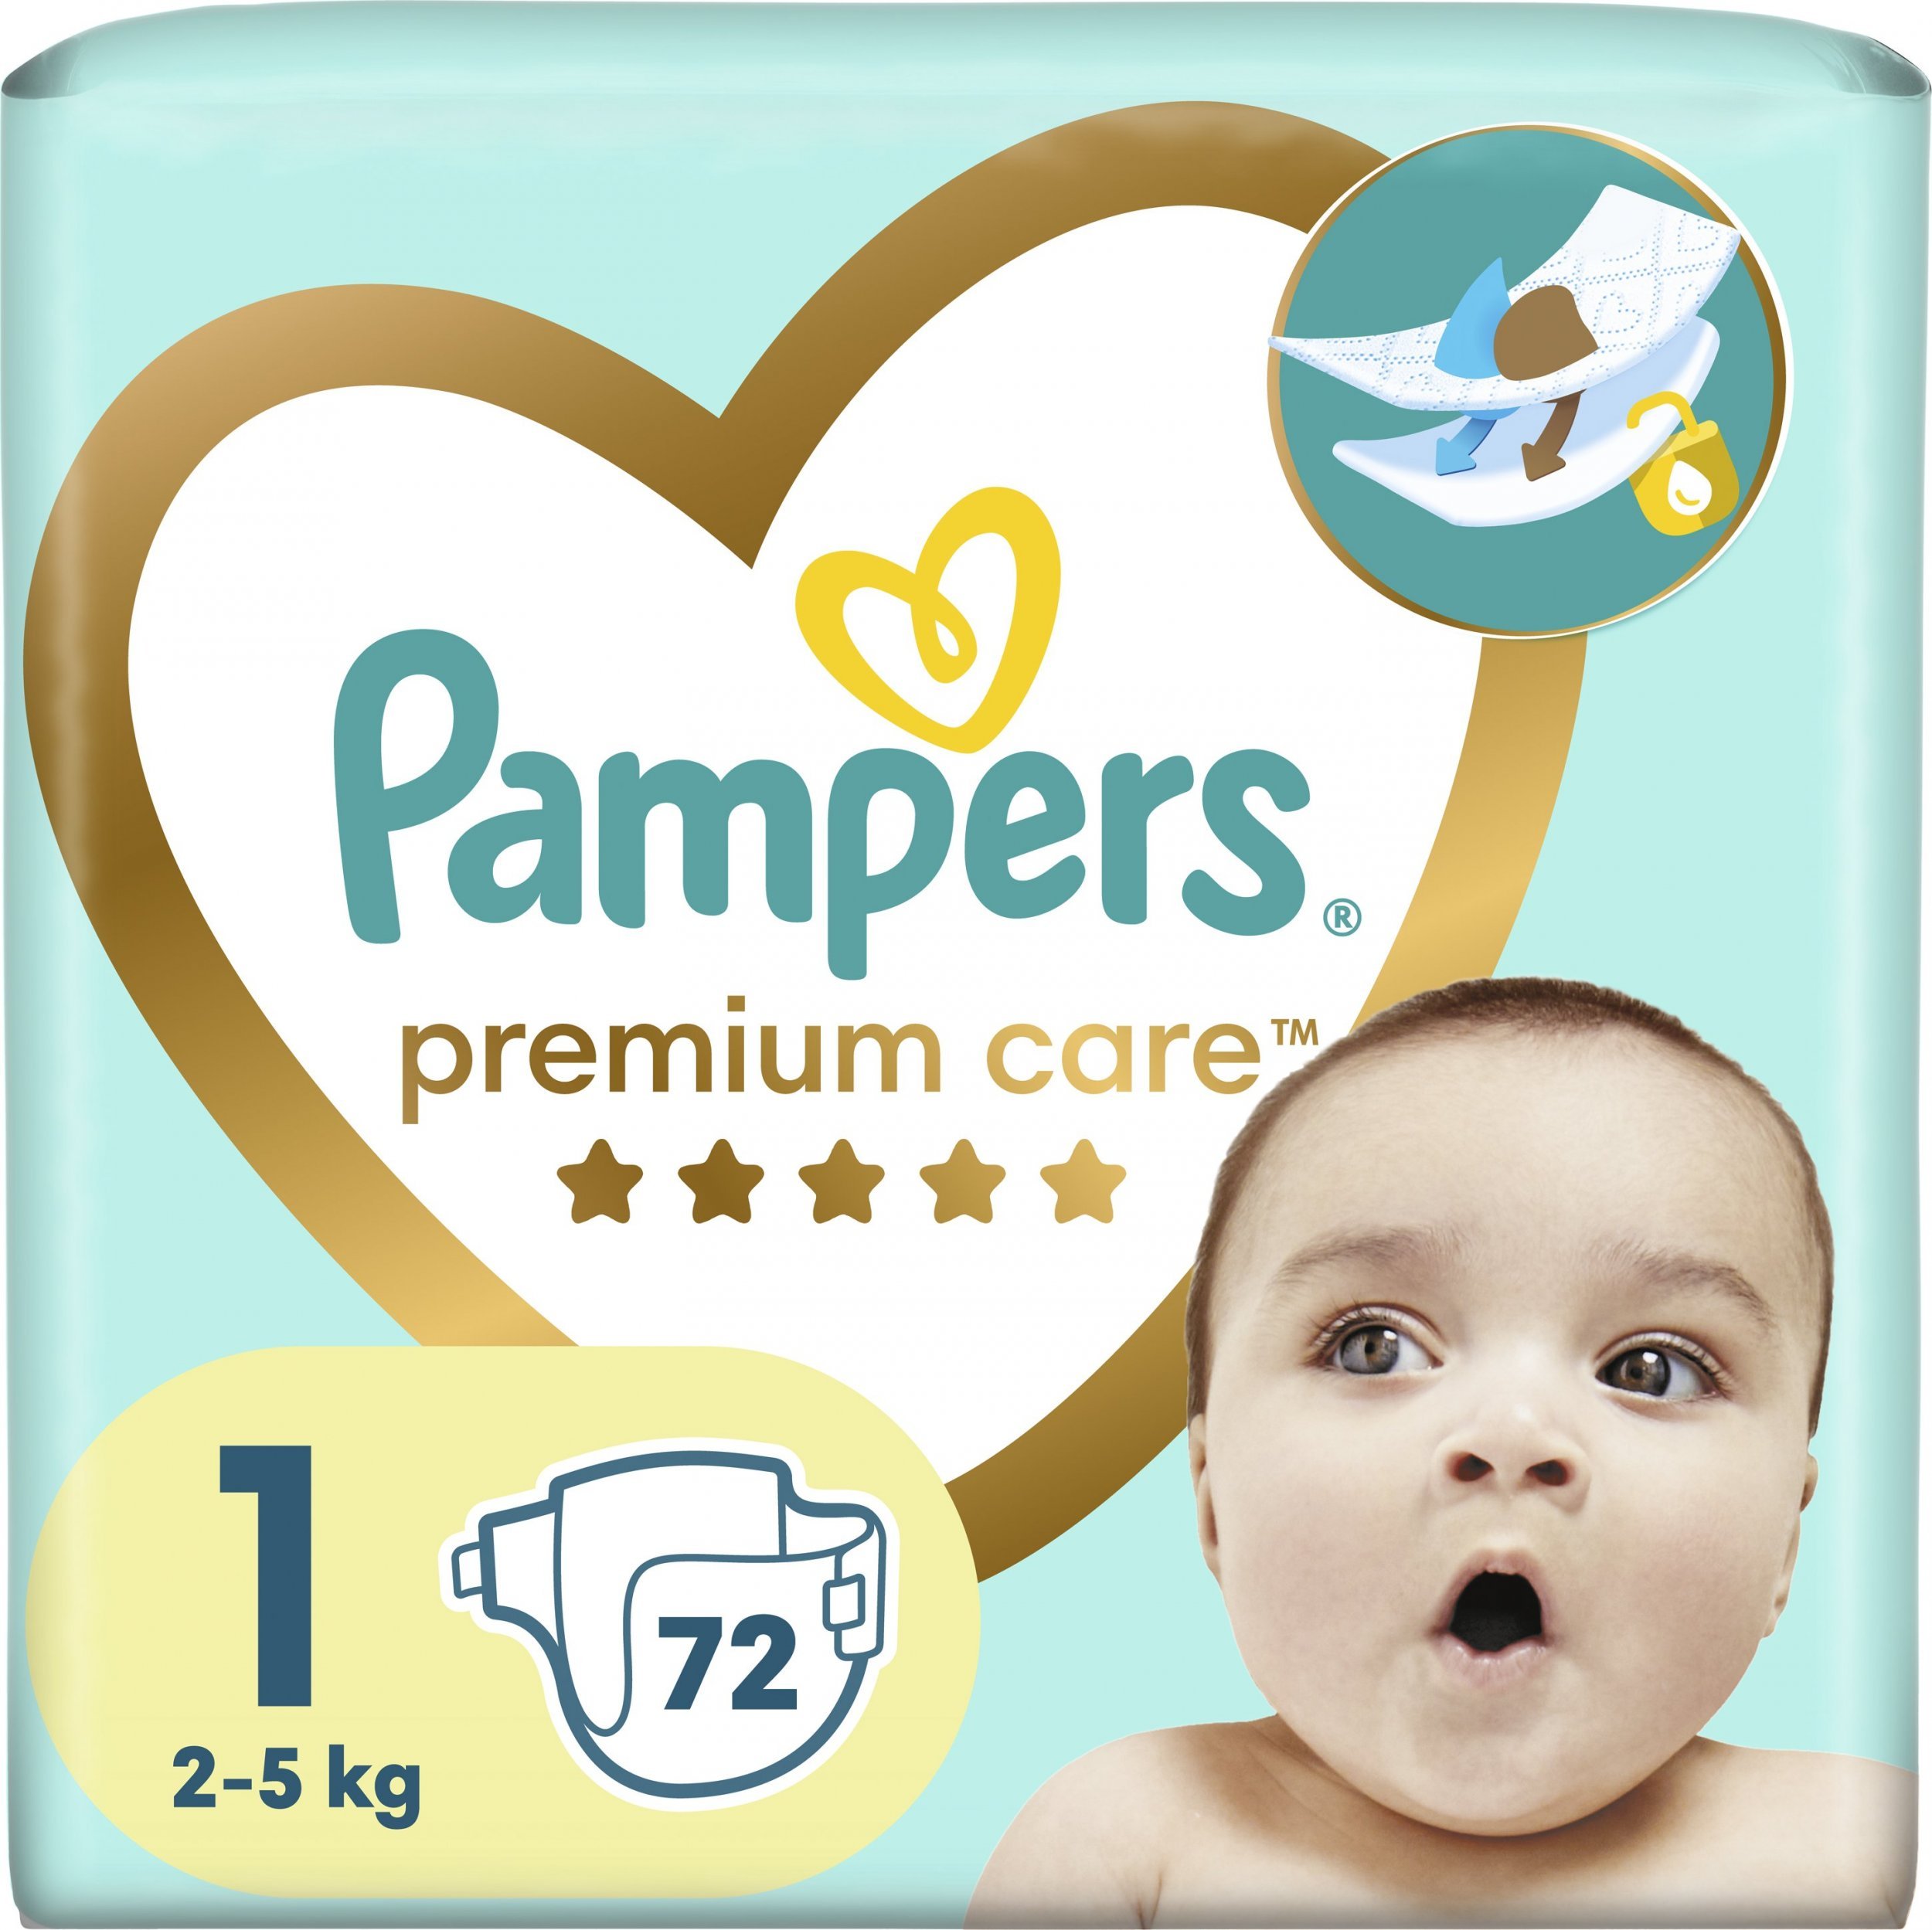 pampers pamers